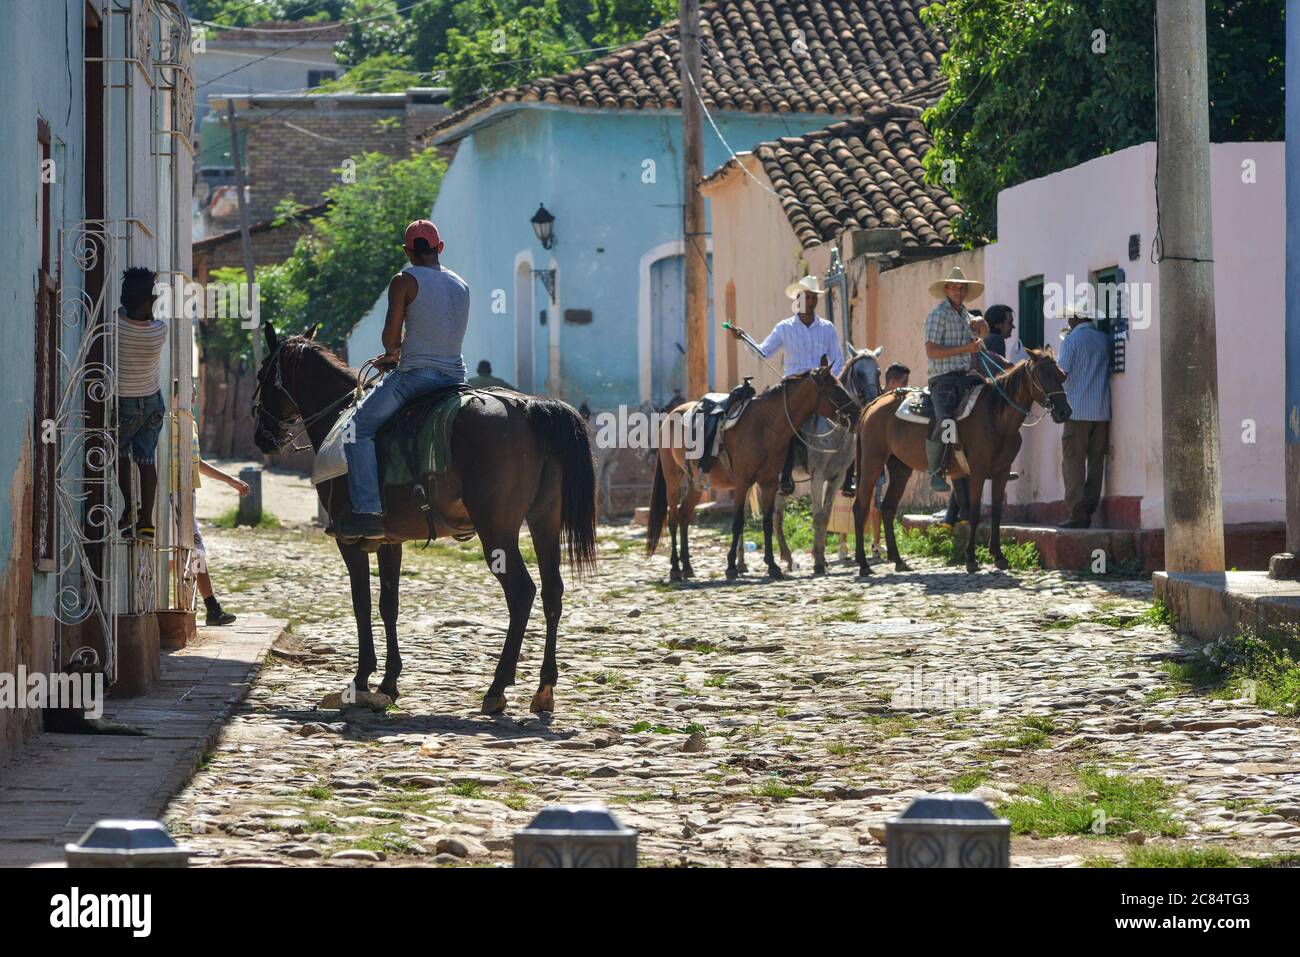 Cuba, Sancti Spiritus Province: Trinidad. Scene from everyday life. Men with cowboy hats, on horseback, talking with another man on the doorstep of hi Stock Photo